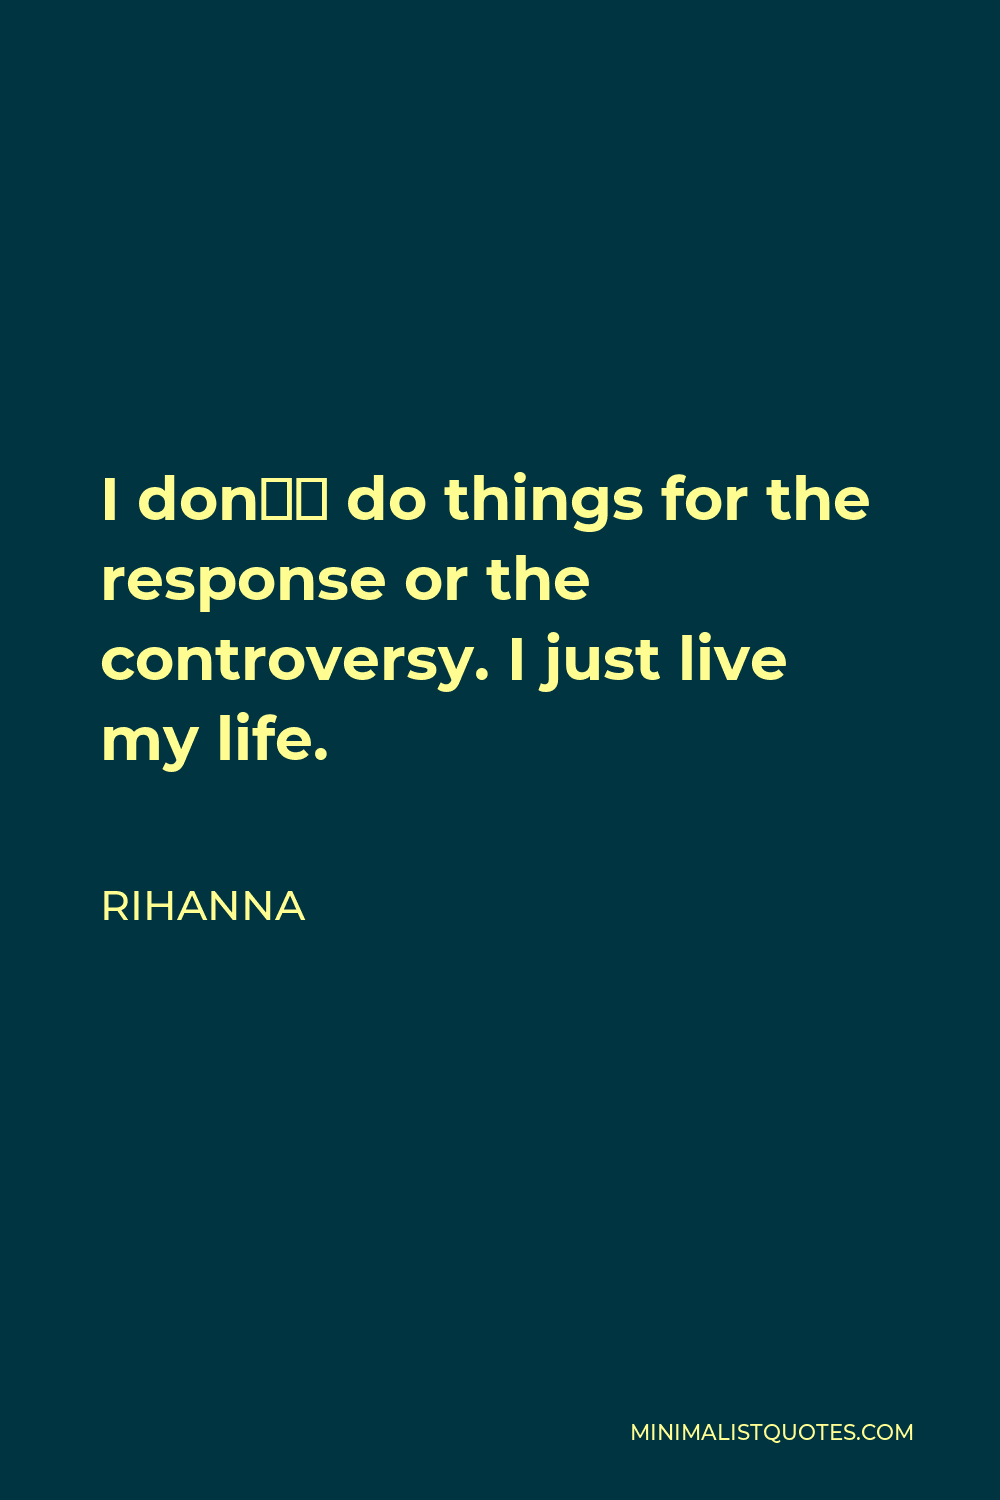 Rihanna Quote - I don’t do things for the response or the controversy. I just live my life.